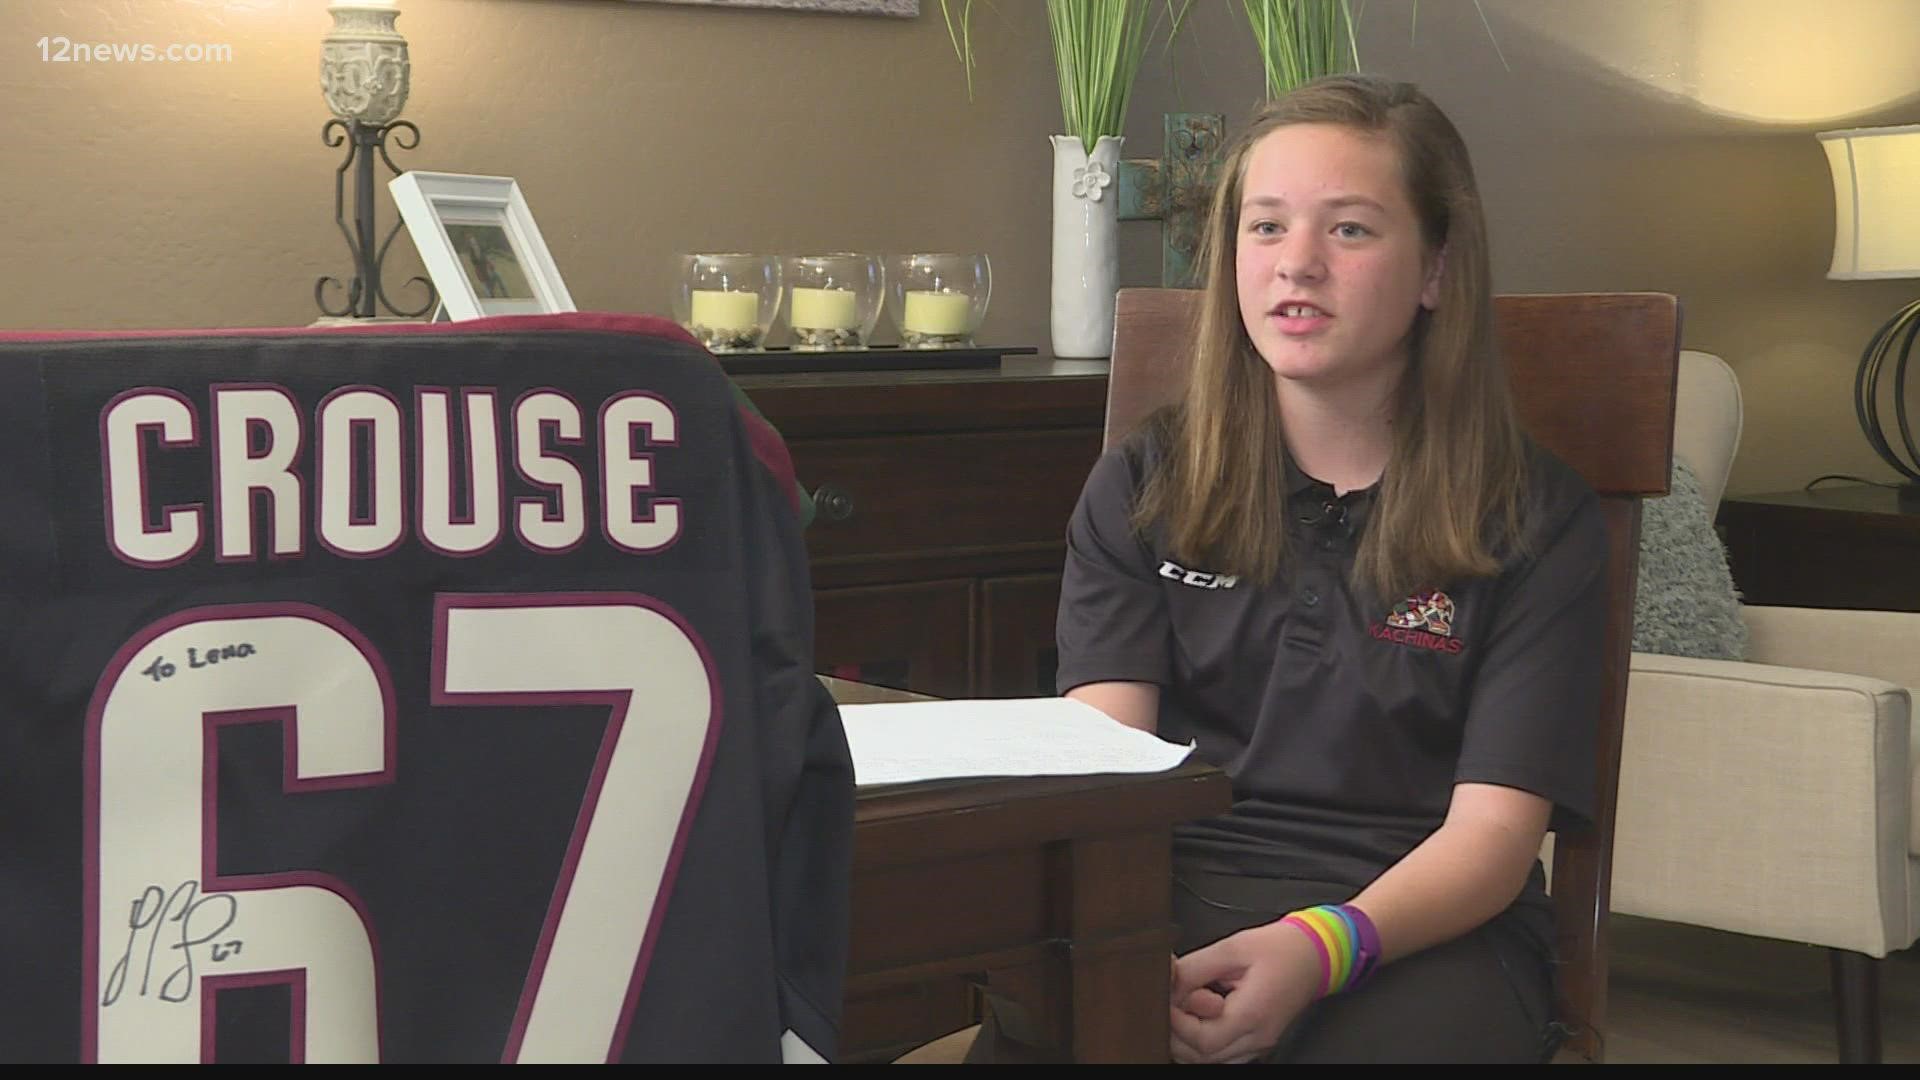 A young Coyotes fan was worried Lawson Crouse would be traded, so she wrote a letter to the GM to sway him to keep Crouse in Arizona. Here's what happens next.